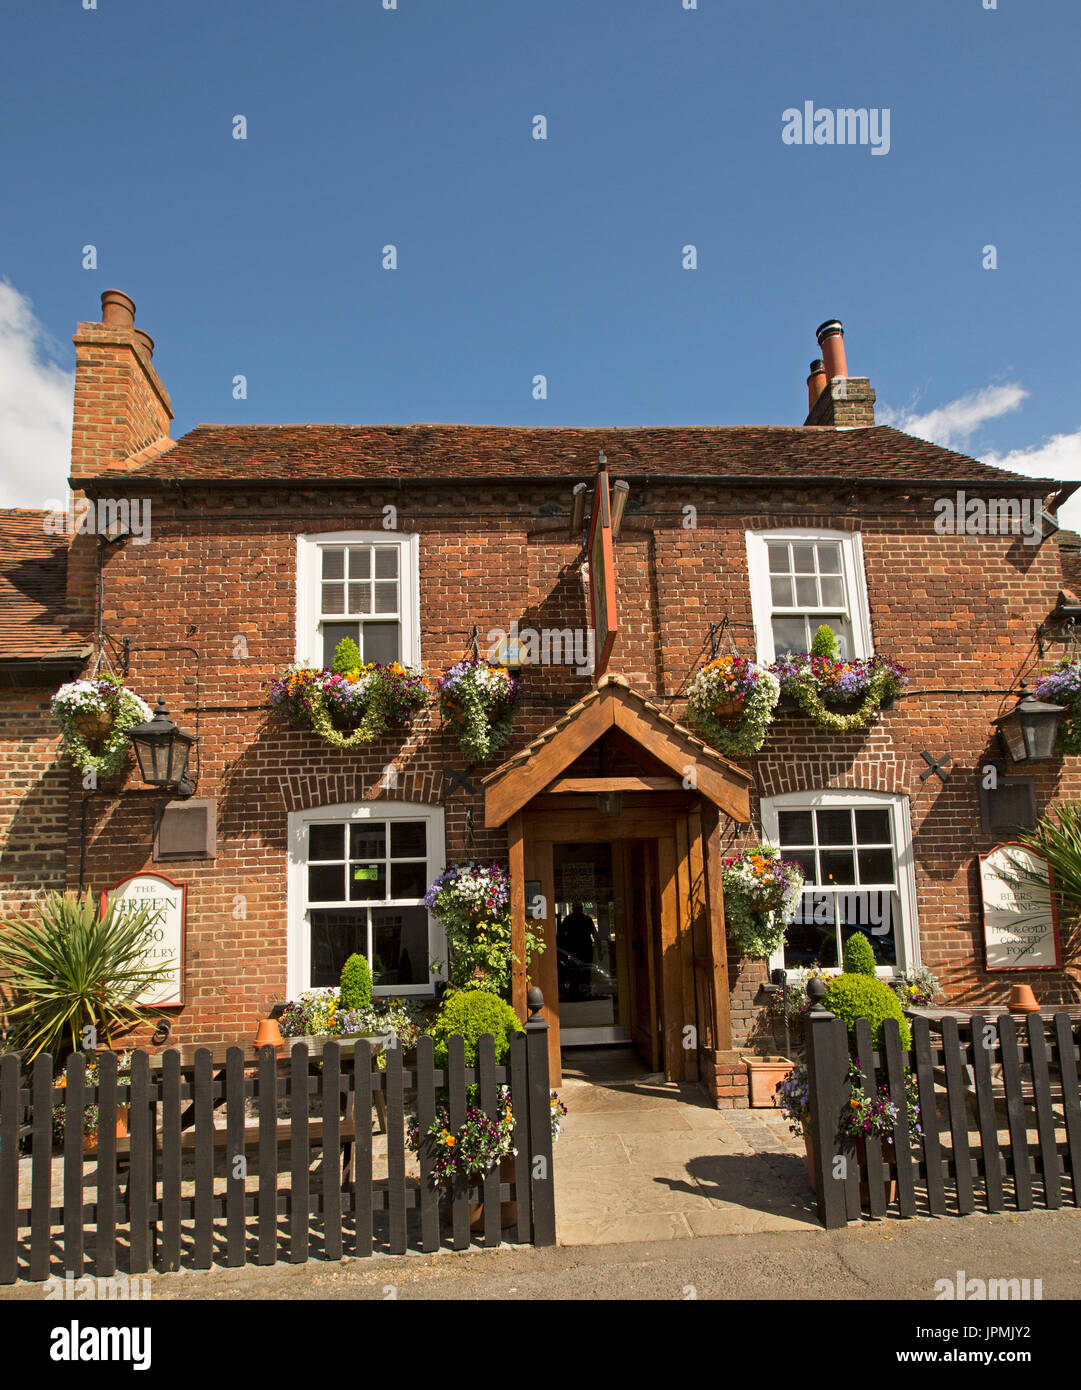 Red brick pub, The Green Man, a free house with hanging baskets of flowers, picket fence, and beer kegs in English village of Denham Stock Photo